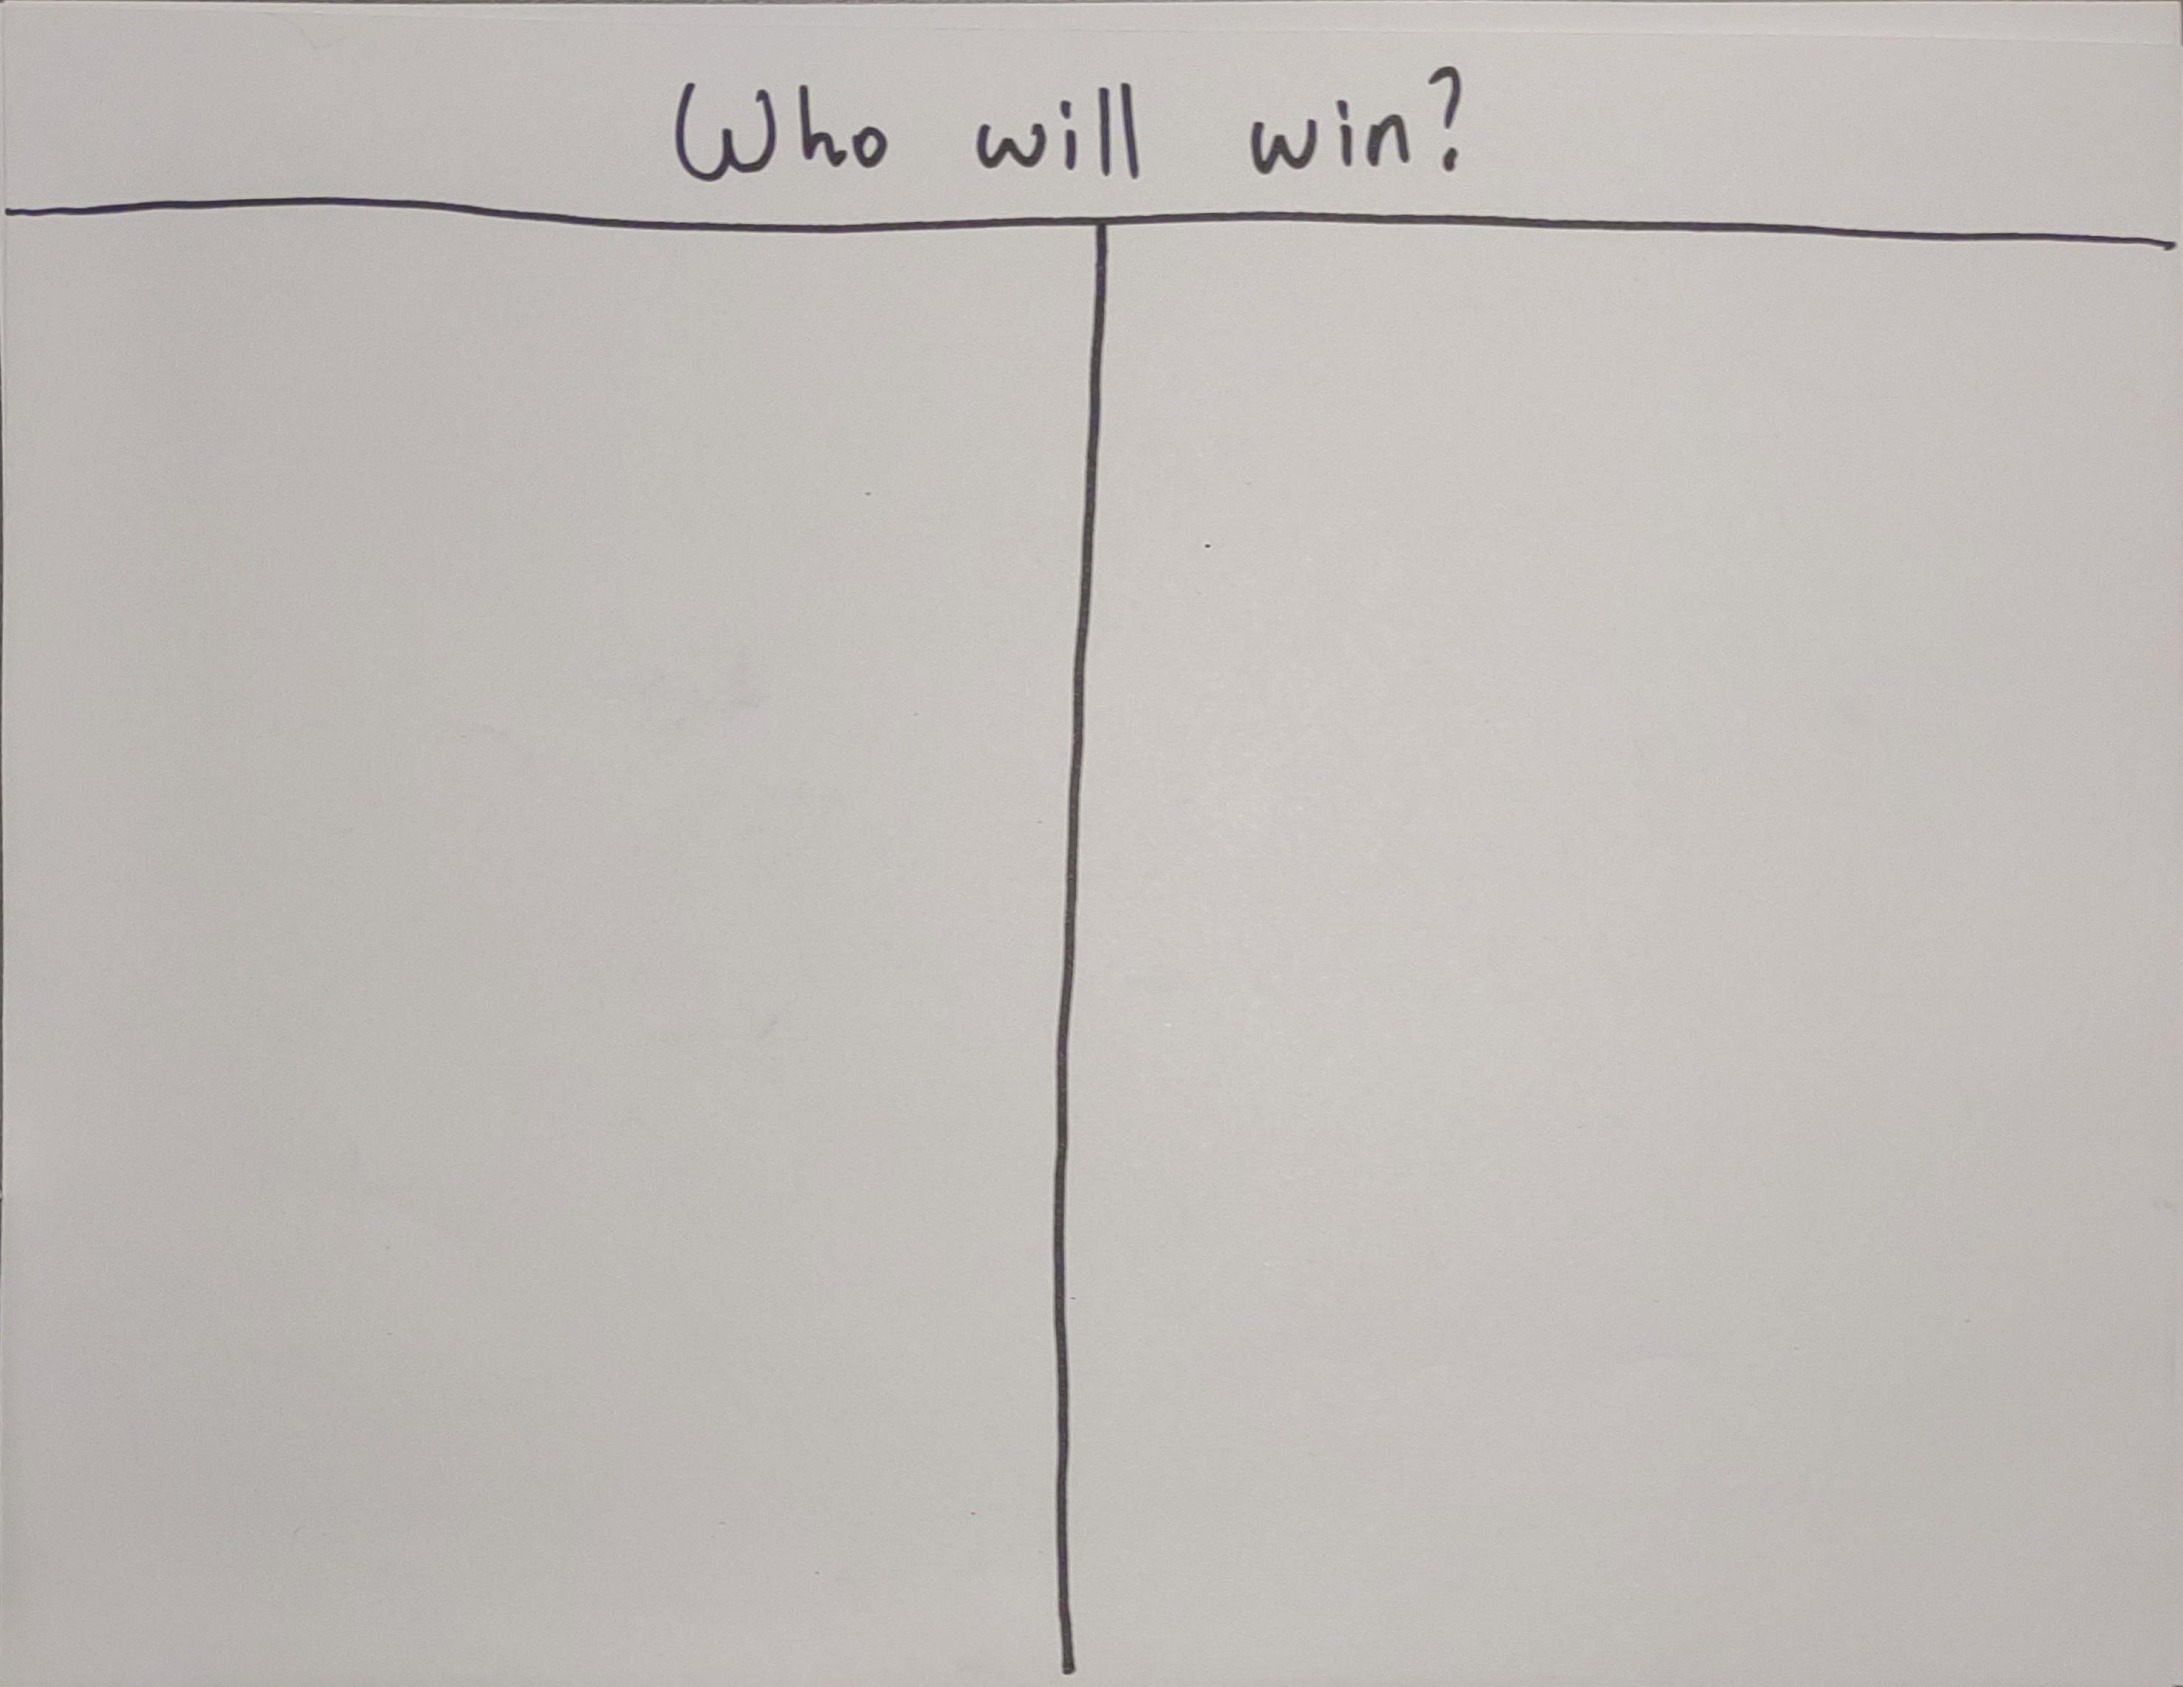 High Quality Who will win? Blank Meme Template